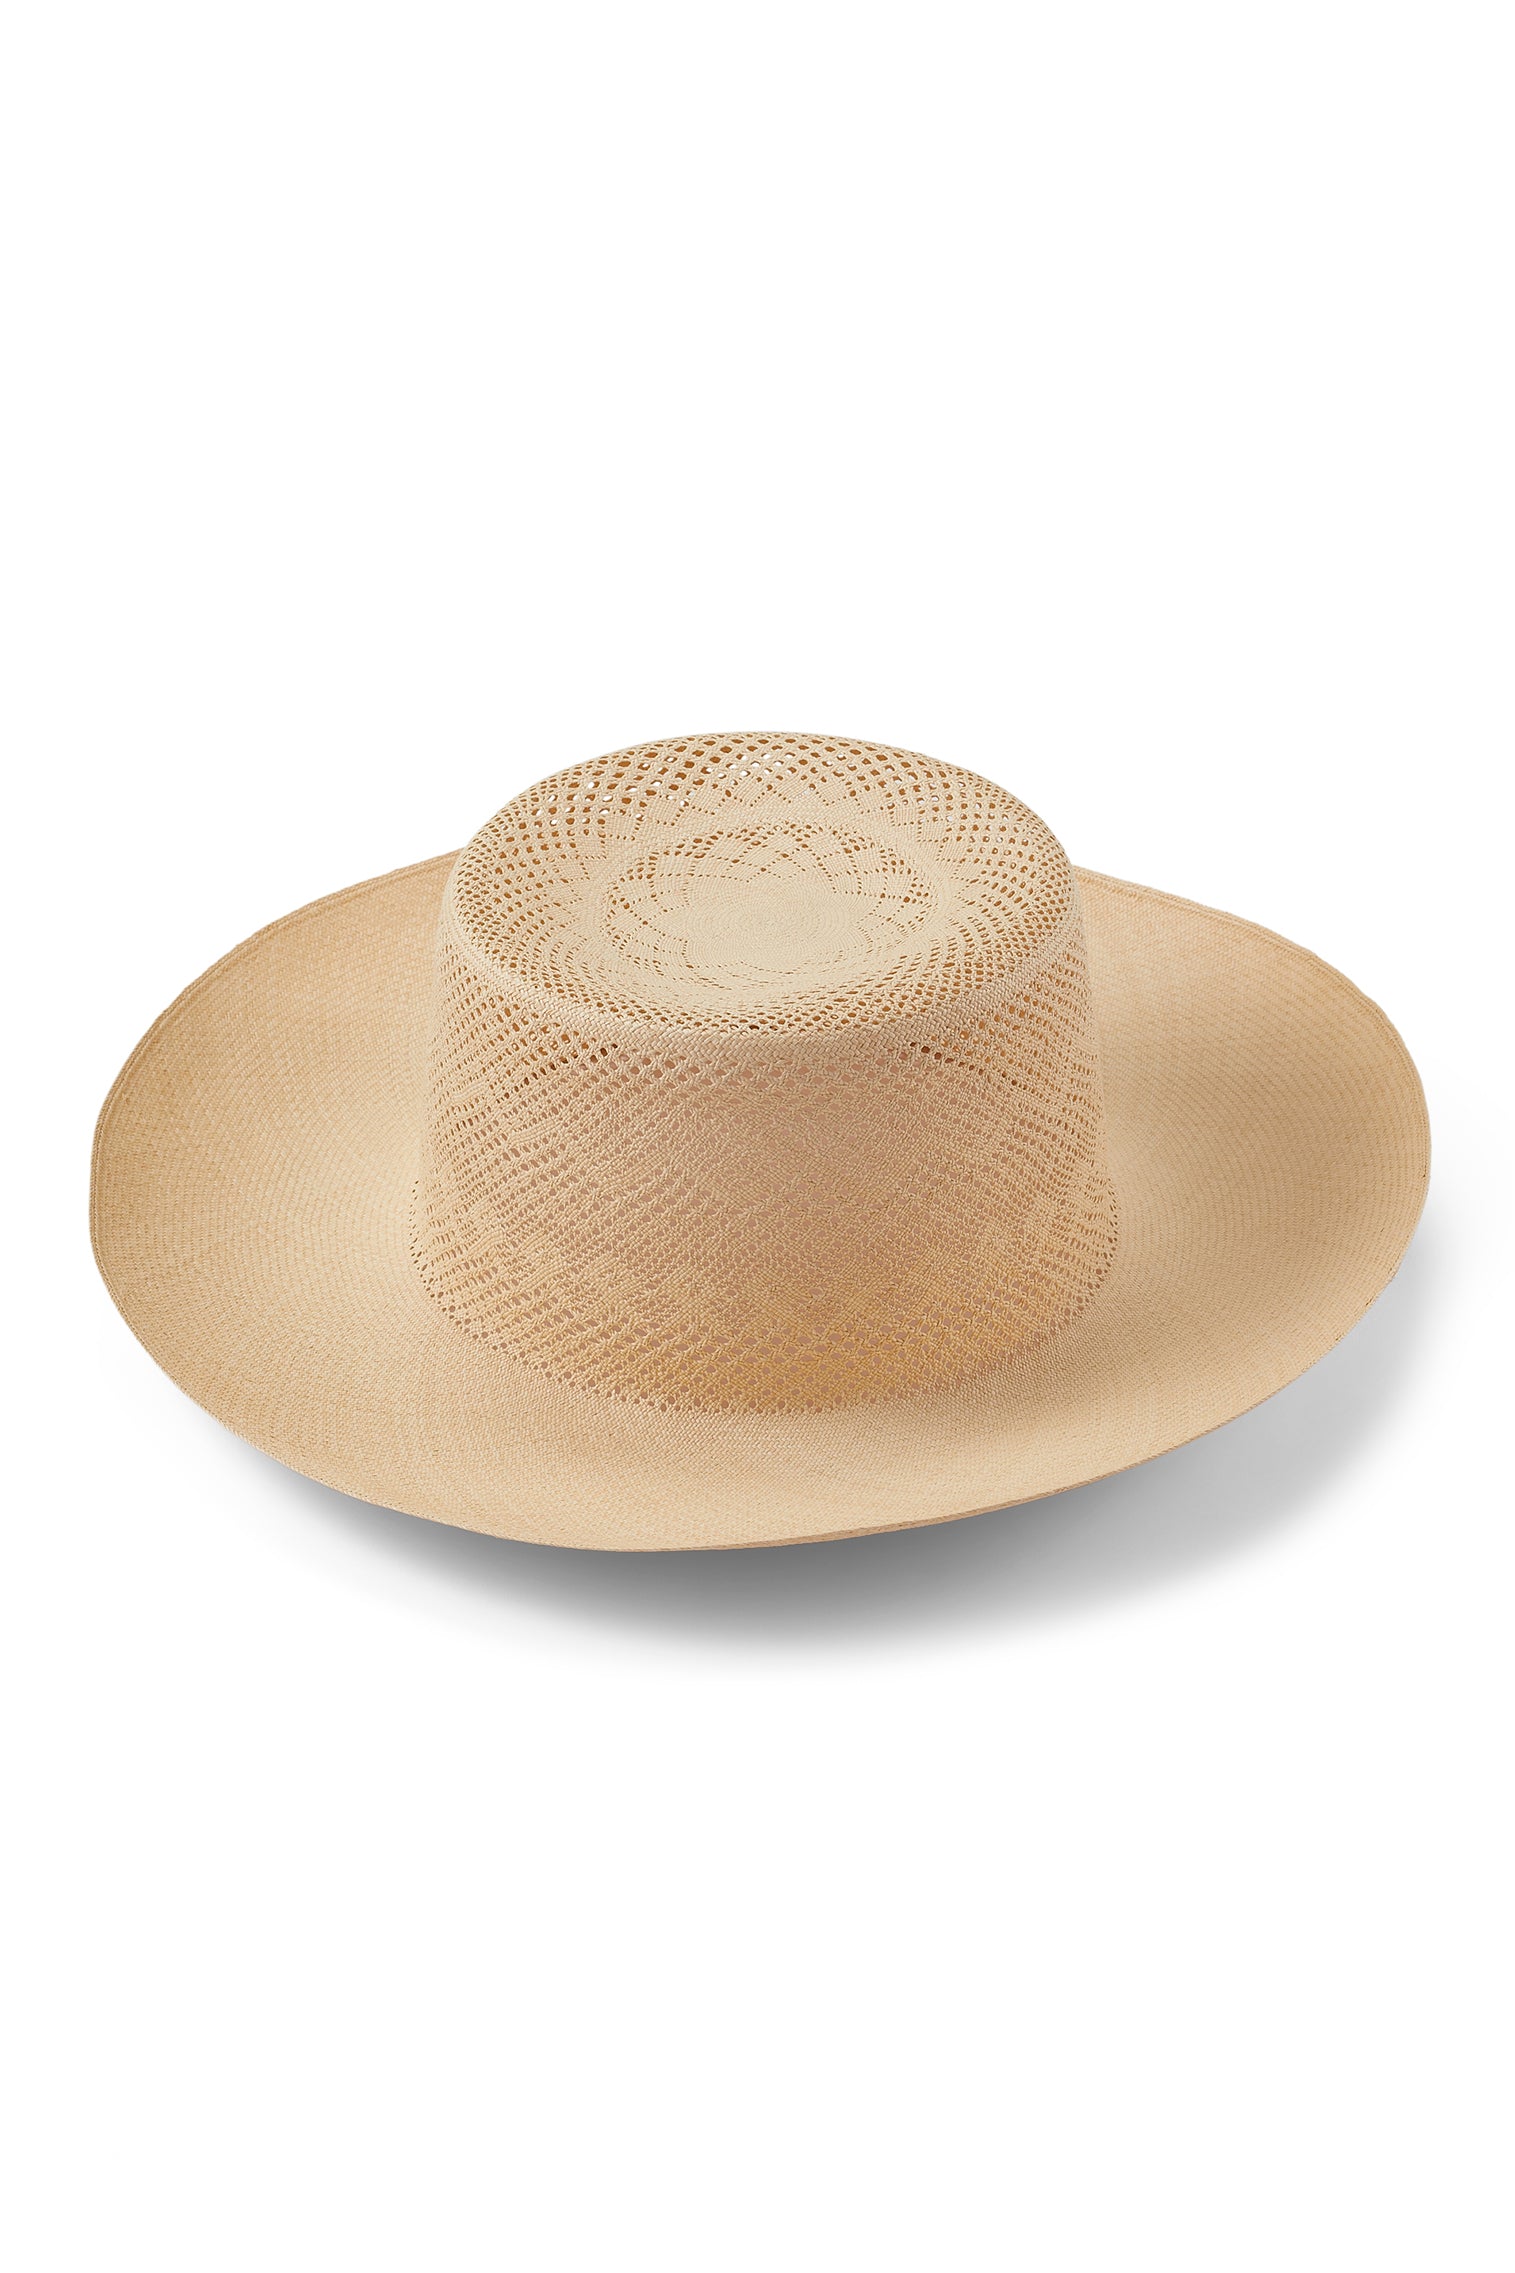 Katelyn Woven Panama - The Bespoke Embroidered Panama Hat Collection - Lock & Co. Hatters London UK